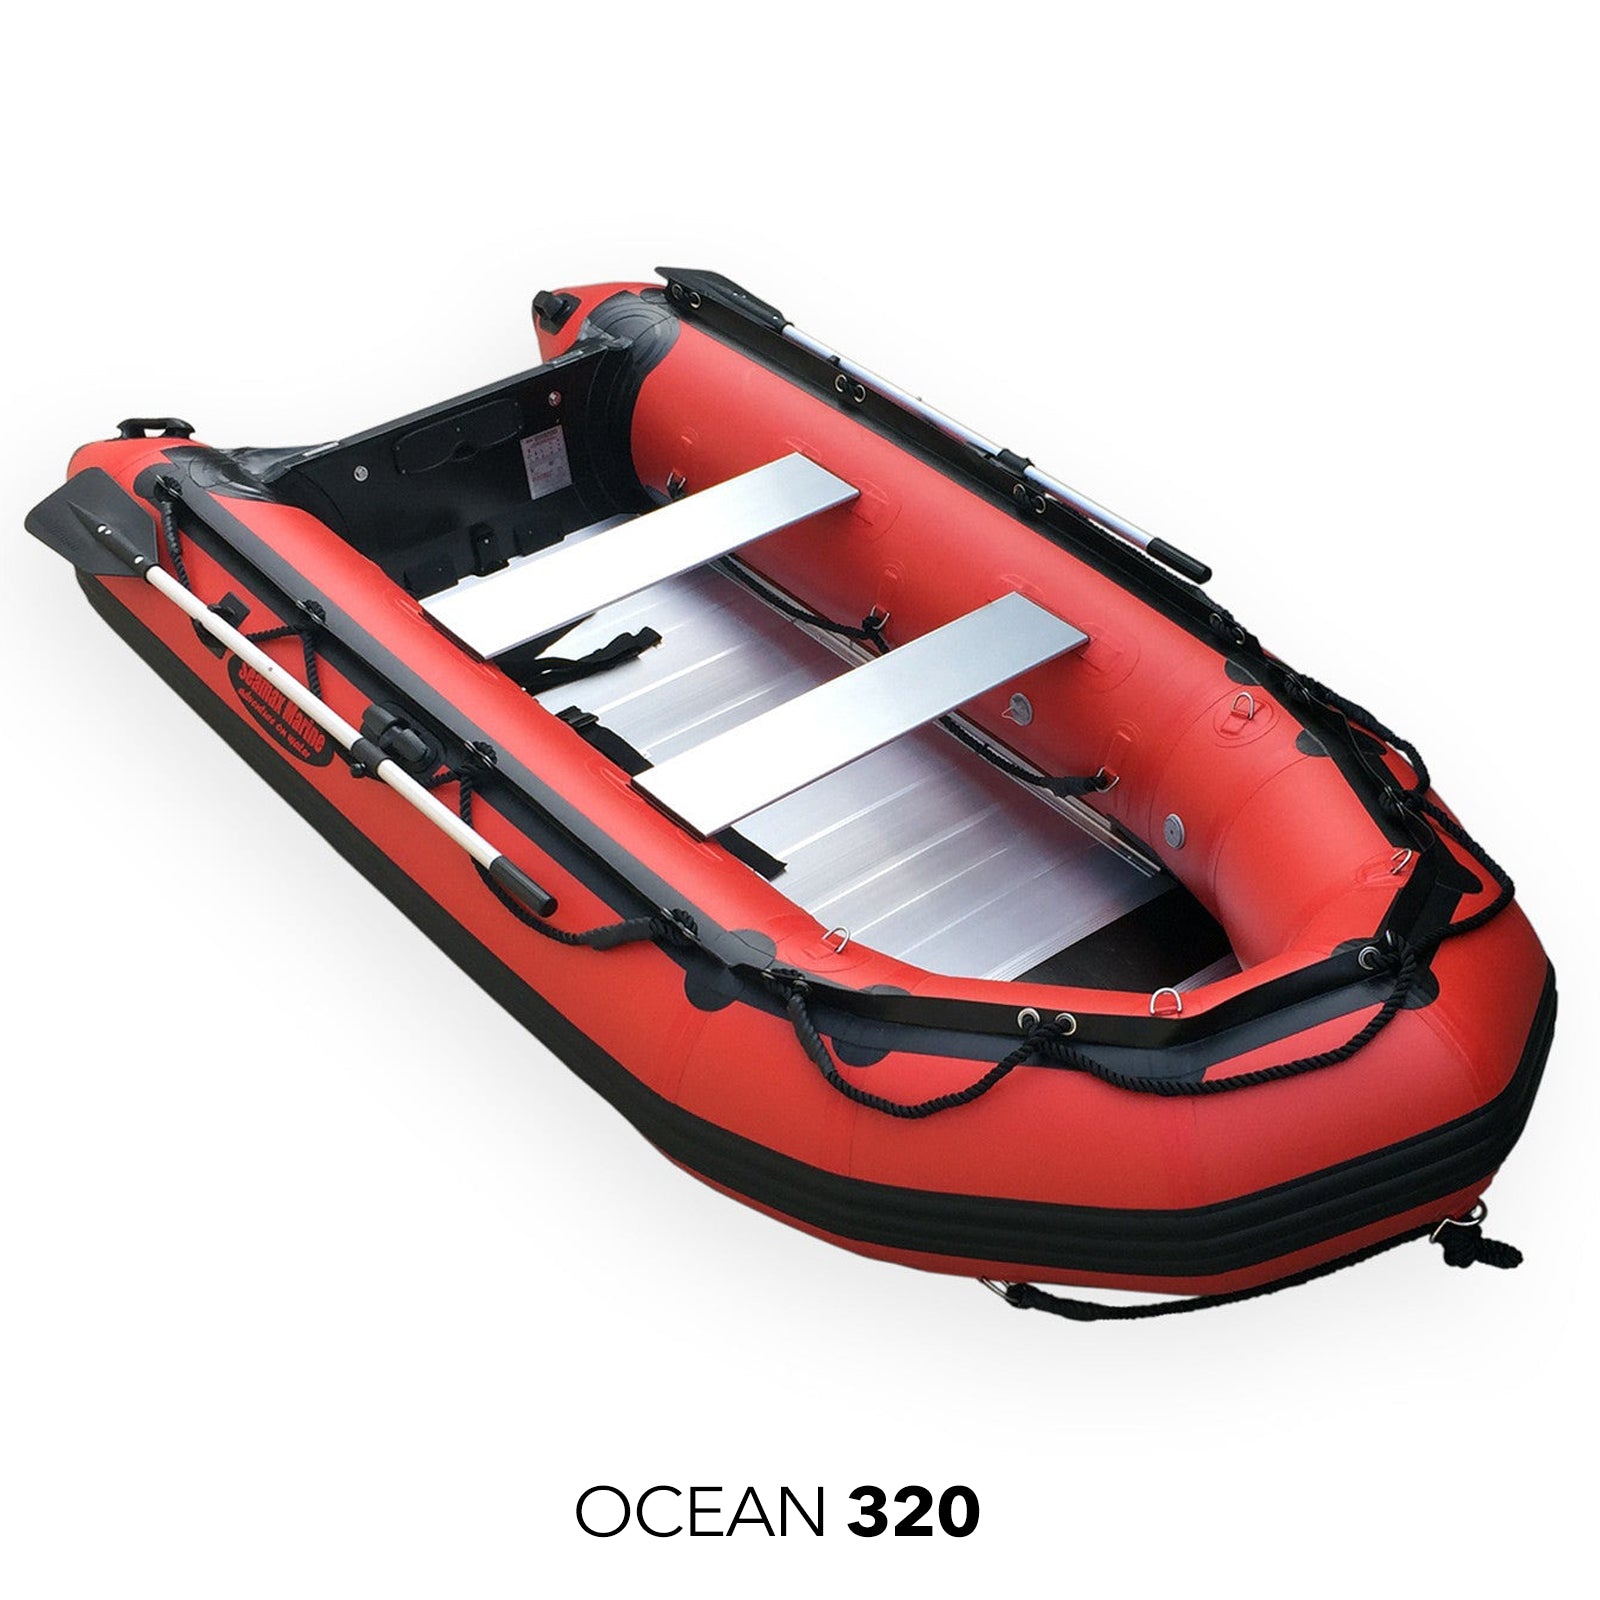 Seamax Ocean320 10.5 Feet Heavy Duty PVC Inflatable Boat, Max 4 Passengers and 15HP Rated